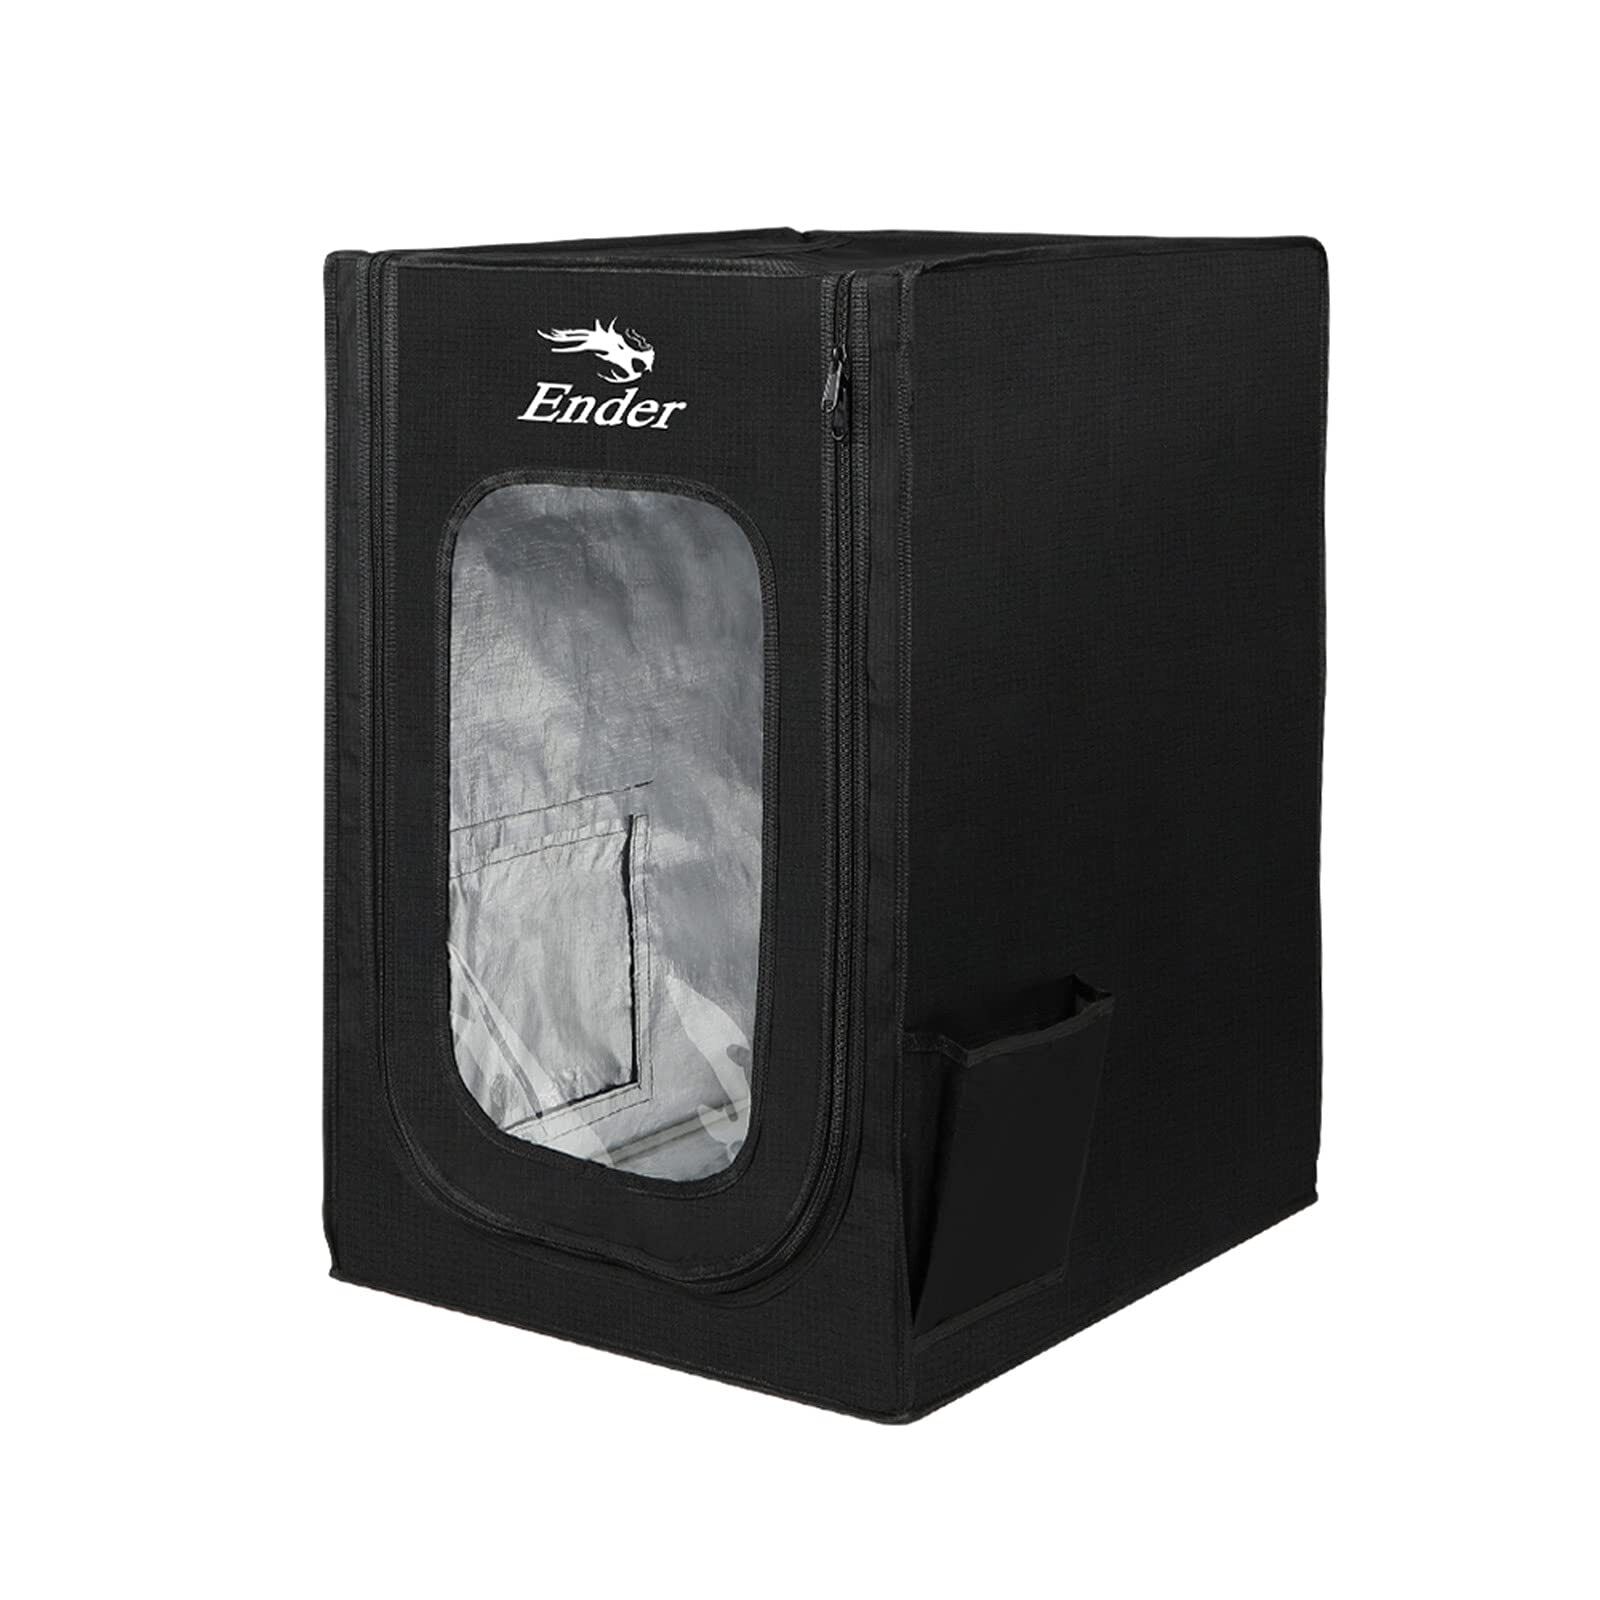 creality ender 3d printer series enclosure fireproof and dustproof tent constant